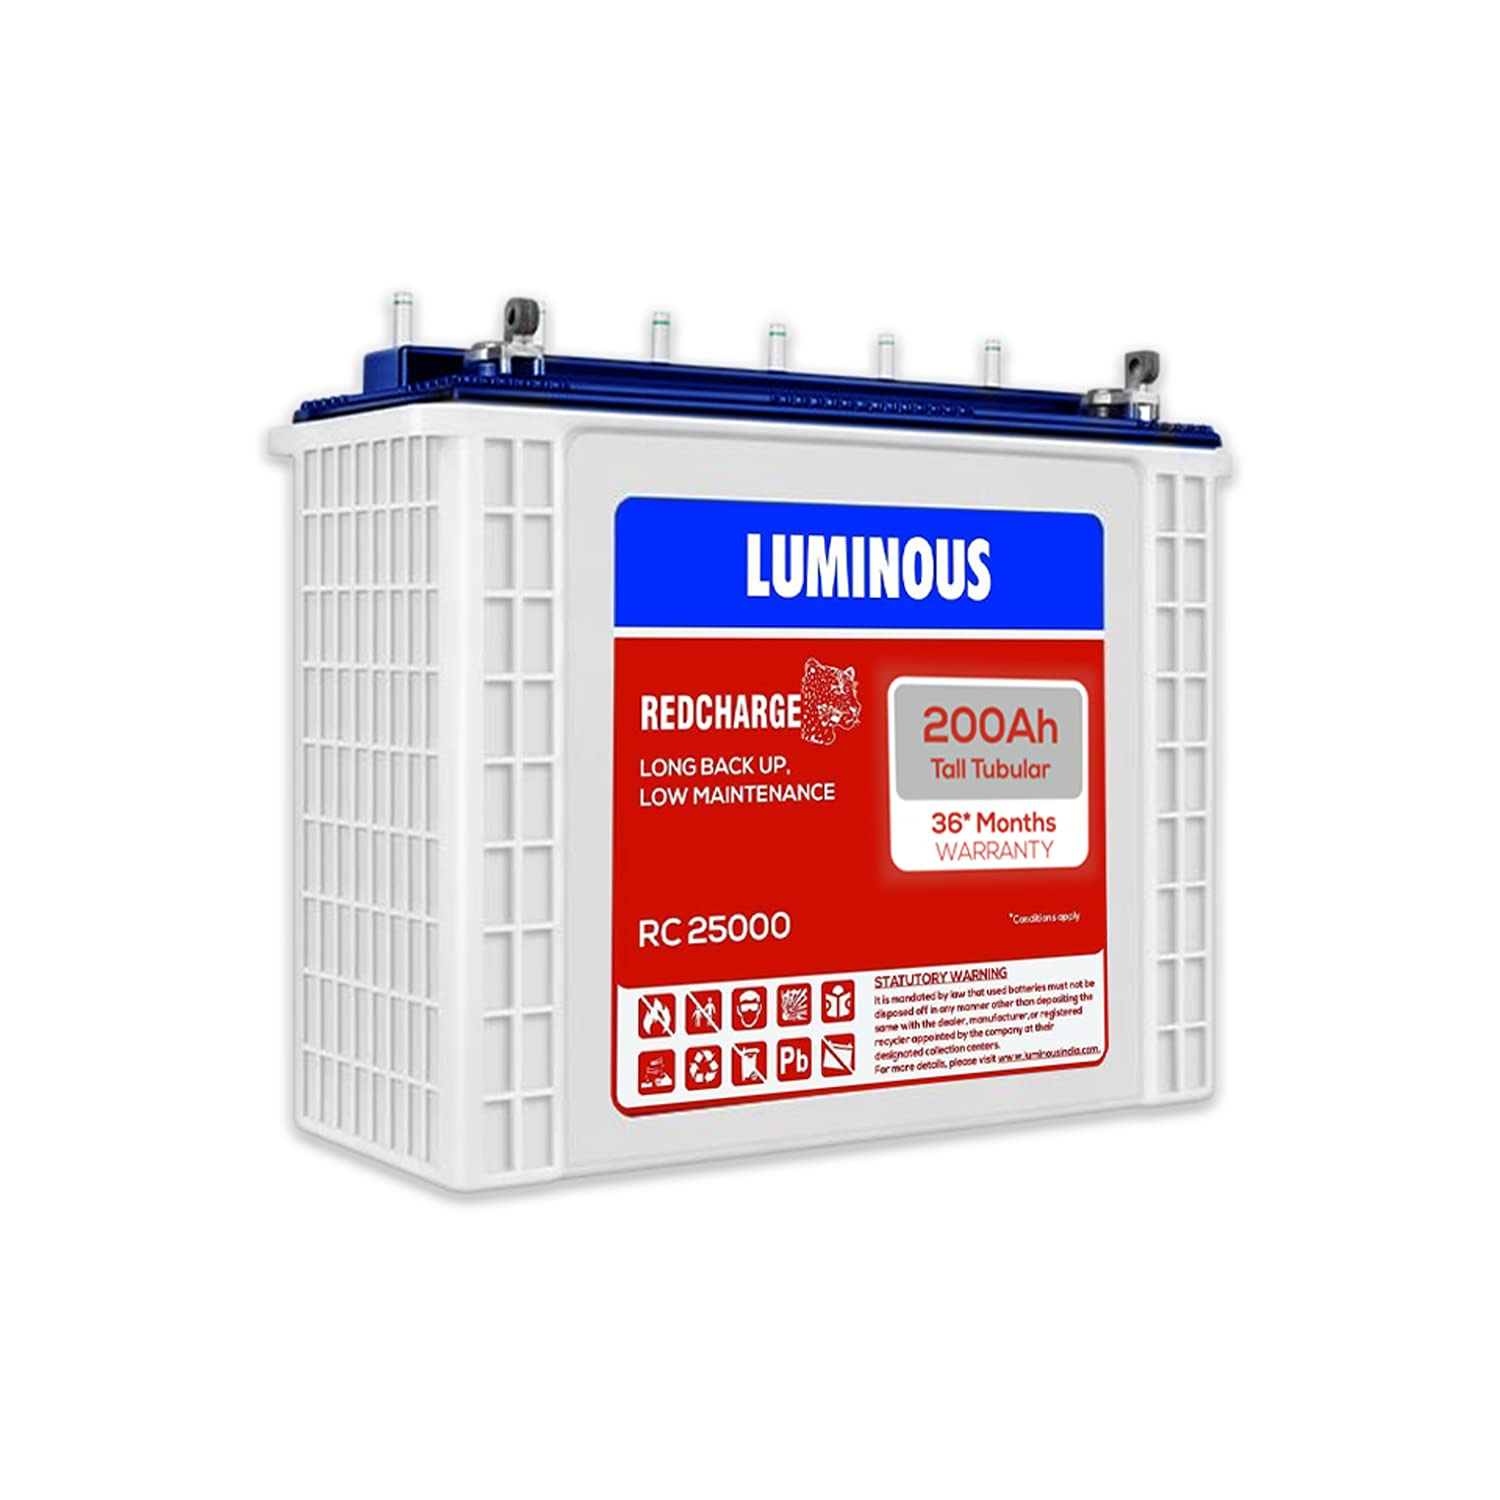 Luminous Red Charge RC 25000 200 Ah Tall Tubular Inverter Battery for Home, Office & Shops (Blue & White)